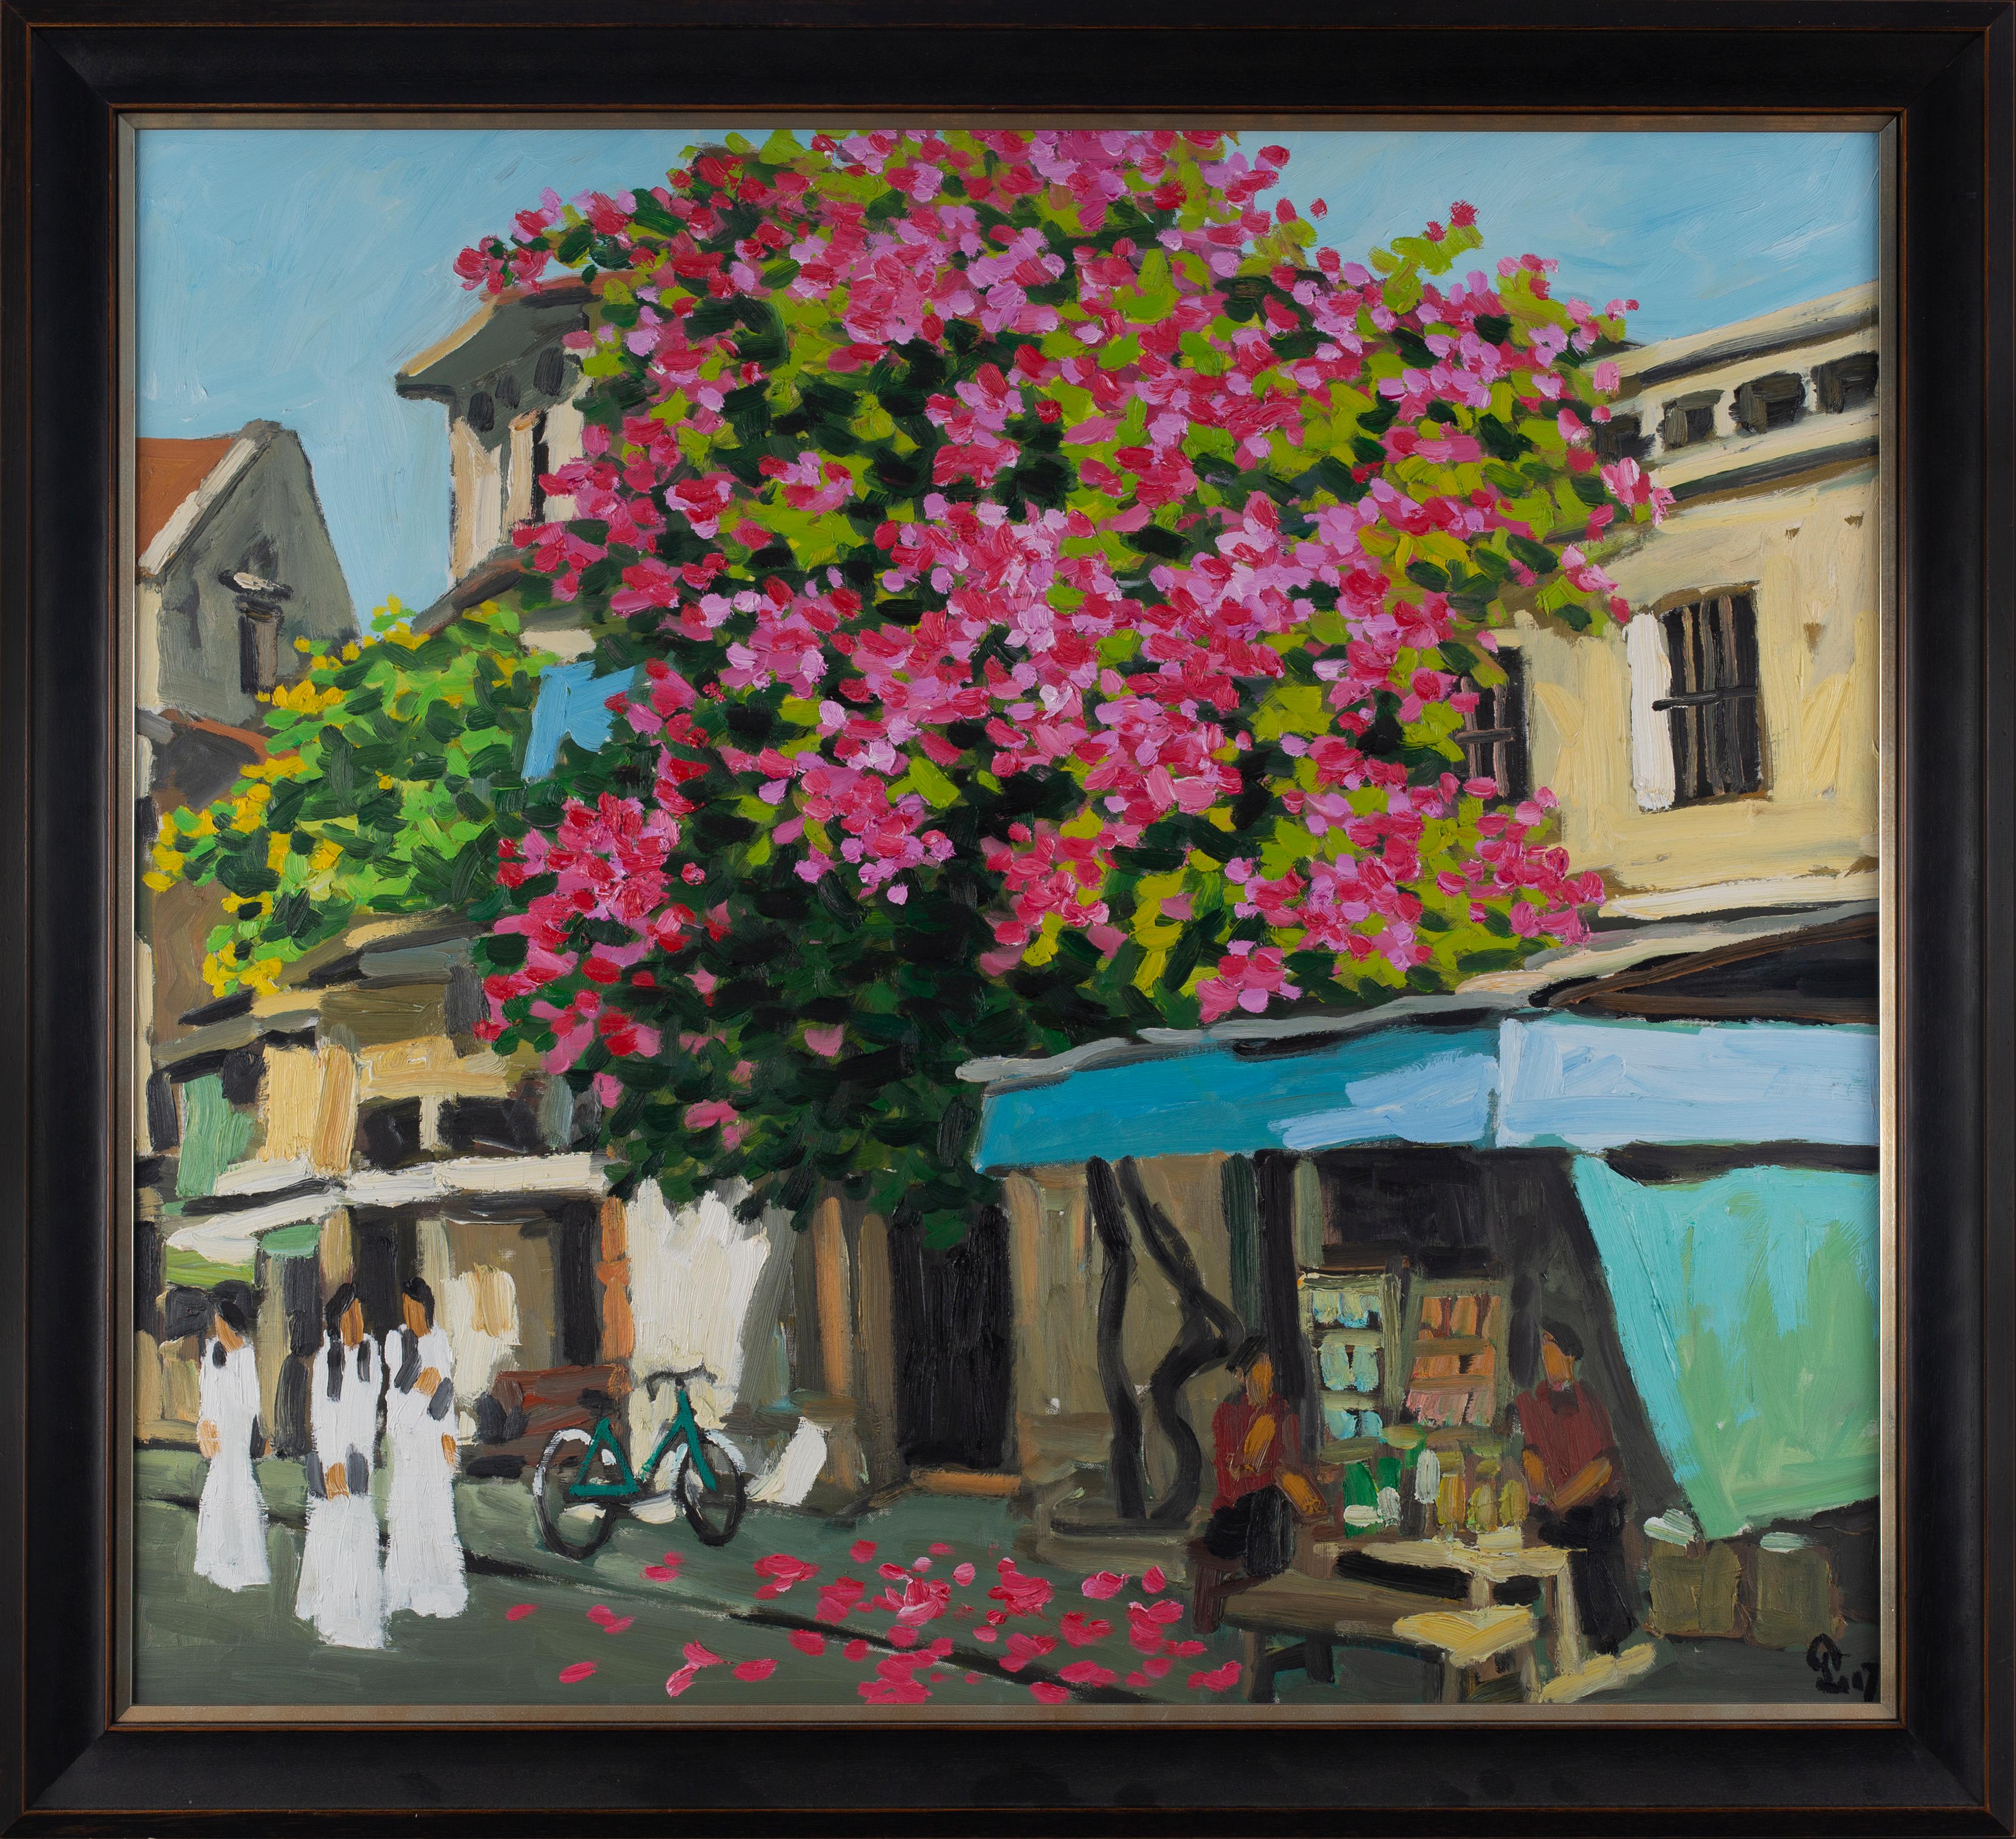 Pham Luan Landscape Painting - 'Hang Be Street' Expressionist Everyday Street Scene with Women and Trees